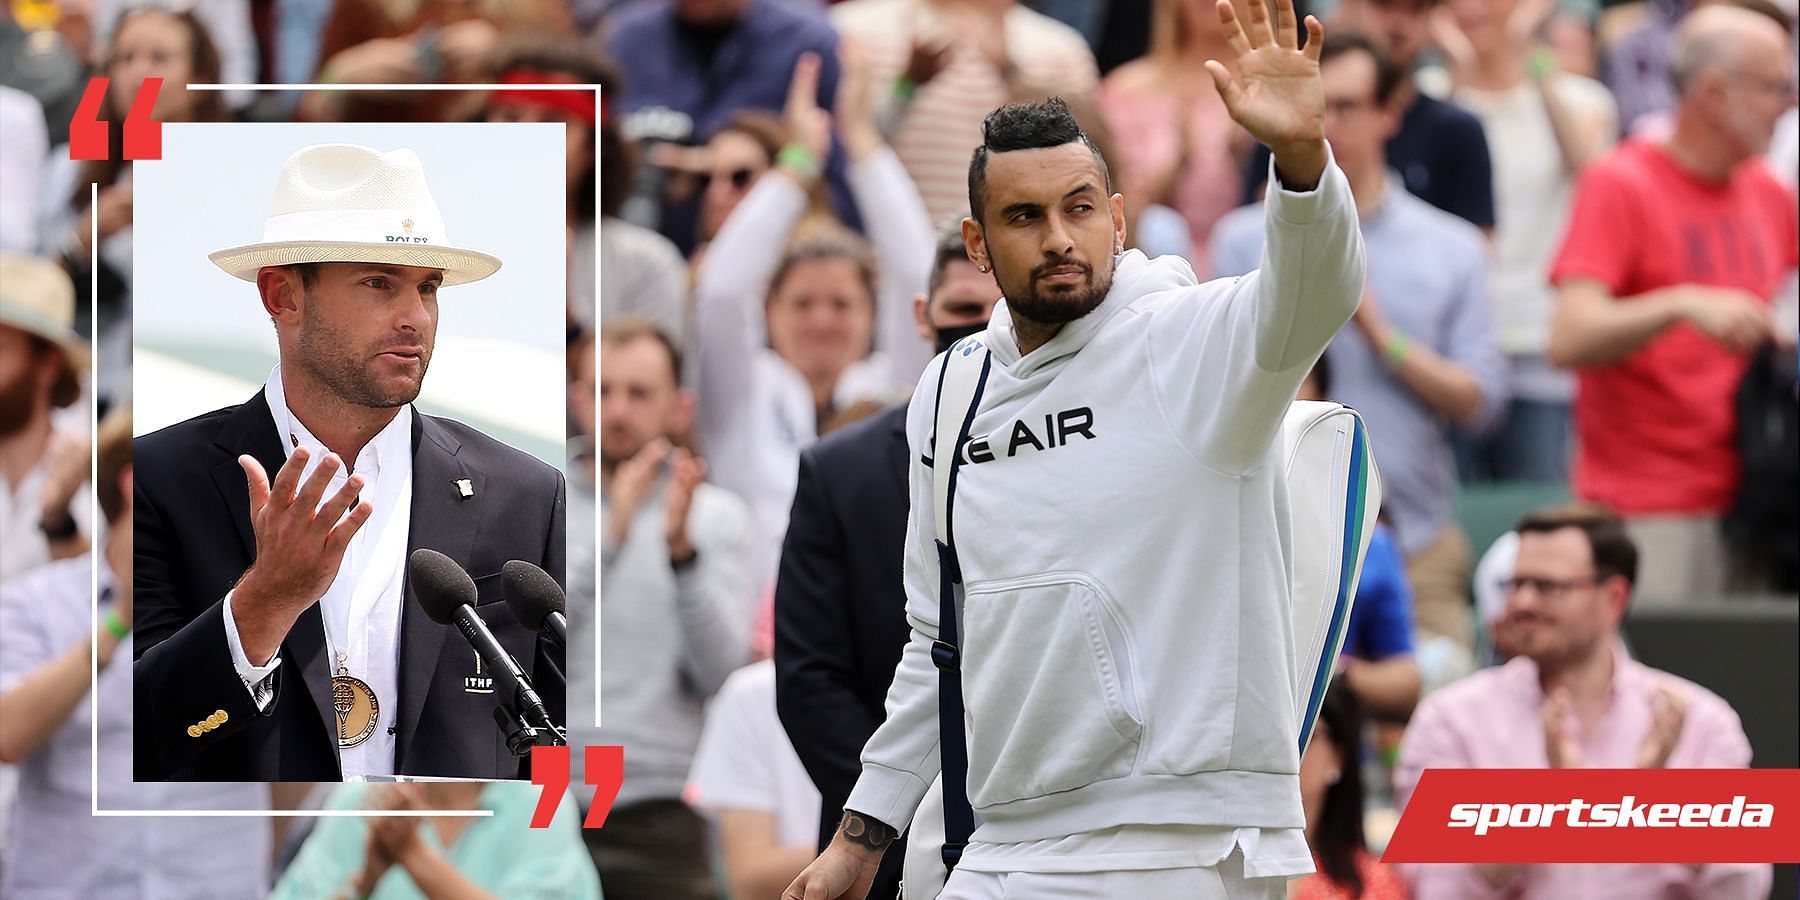 Andy Roddick believes Nick Kyrgios could be a sleeper at Wimbledon this year